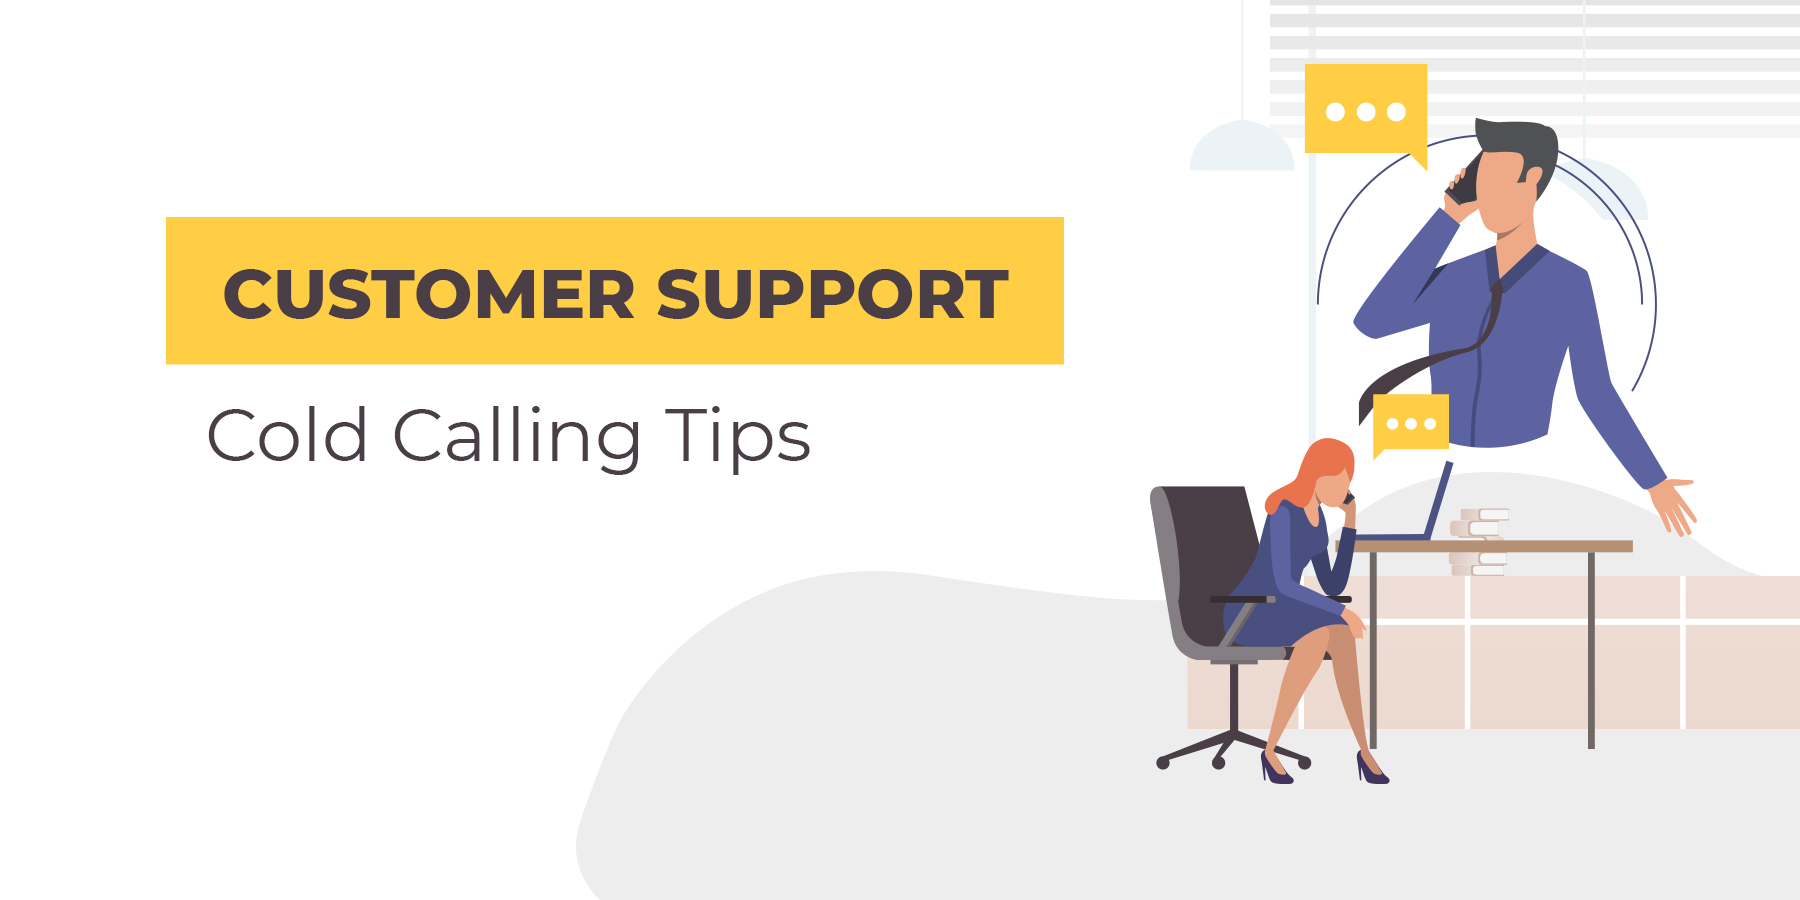 15 Cold Calling Tips from Customer Support Outsourcing Services for Sales Success